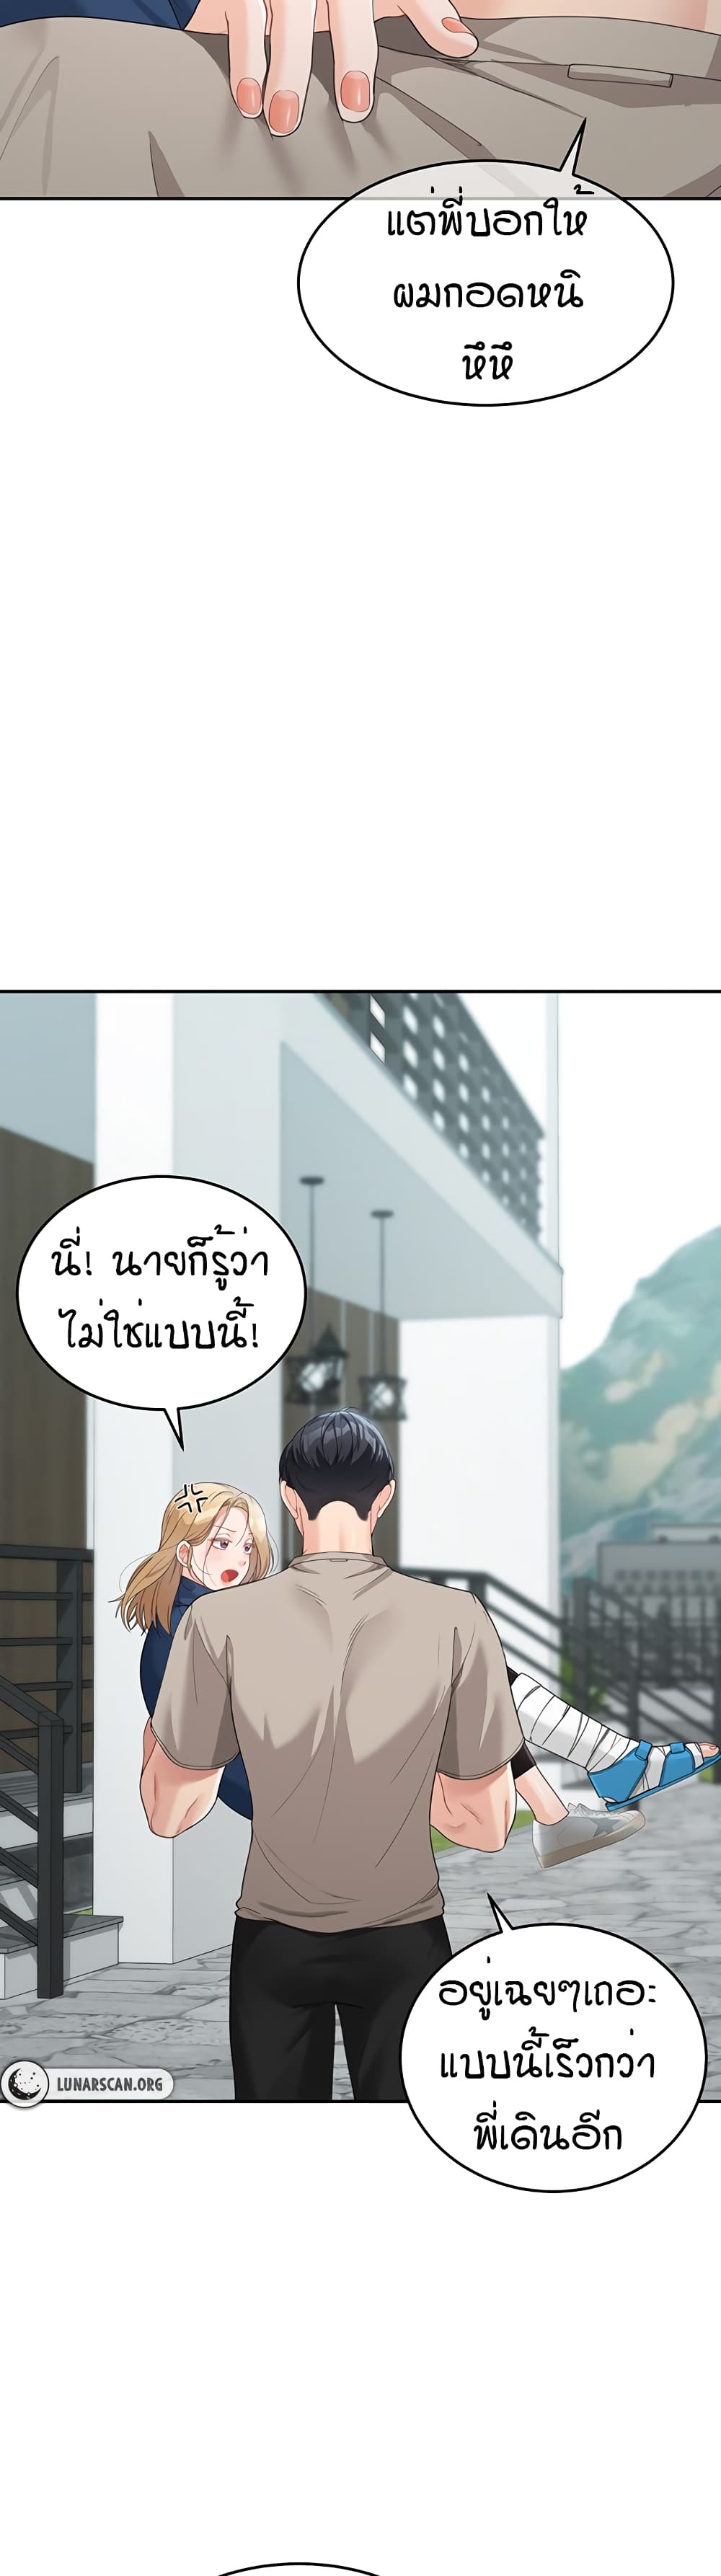 Is It Your Mother or Sister? ตอนที่ 6 ภาพ 22